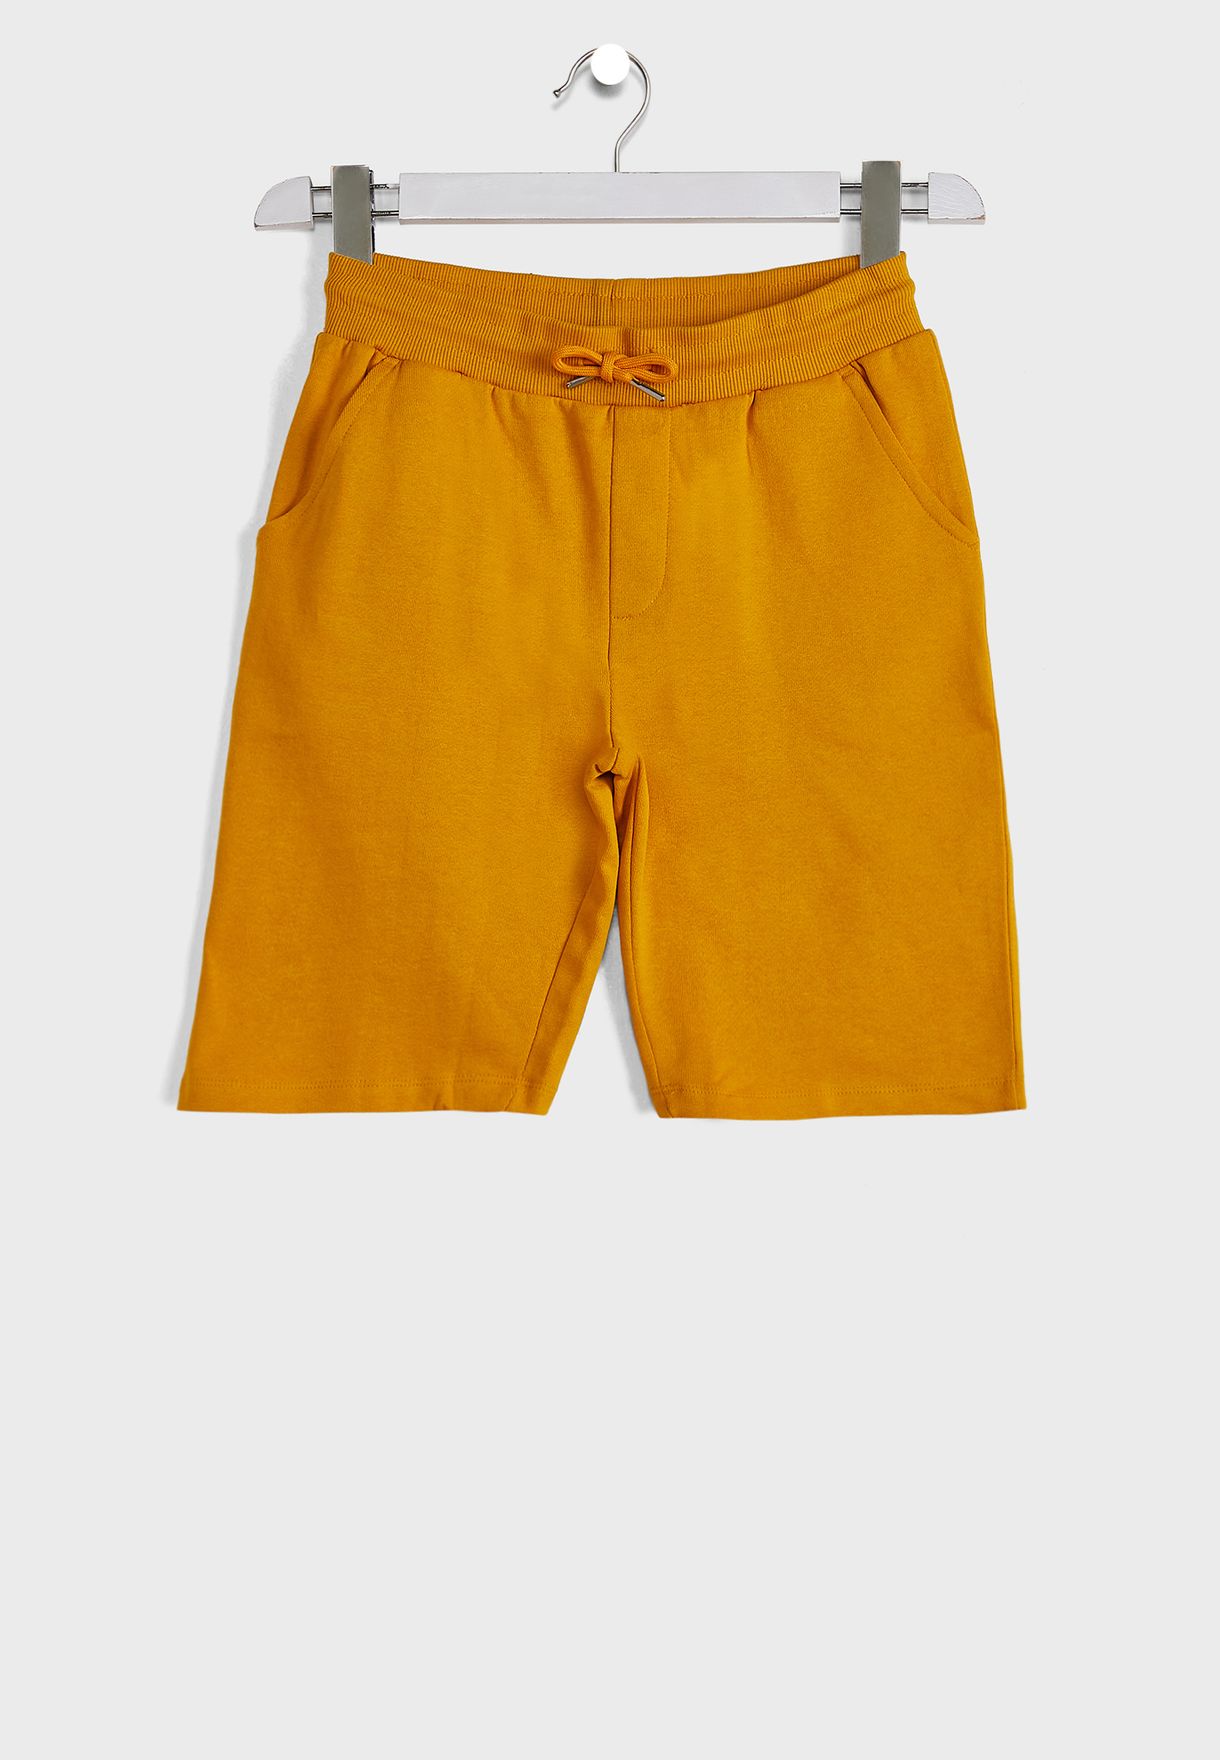 Youth 2 Pack Shorts